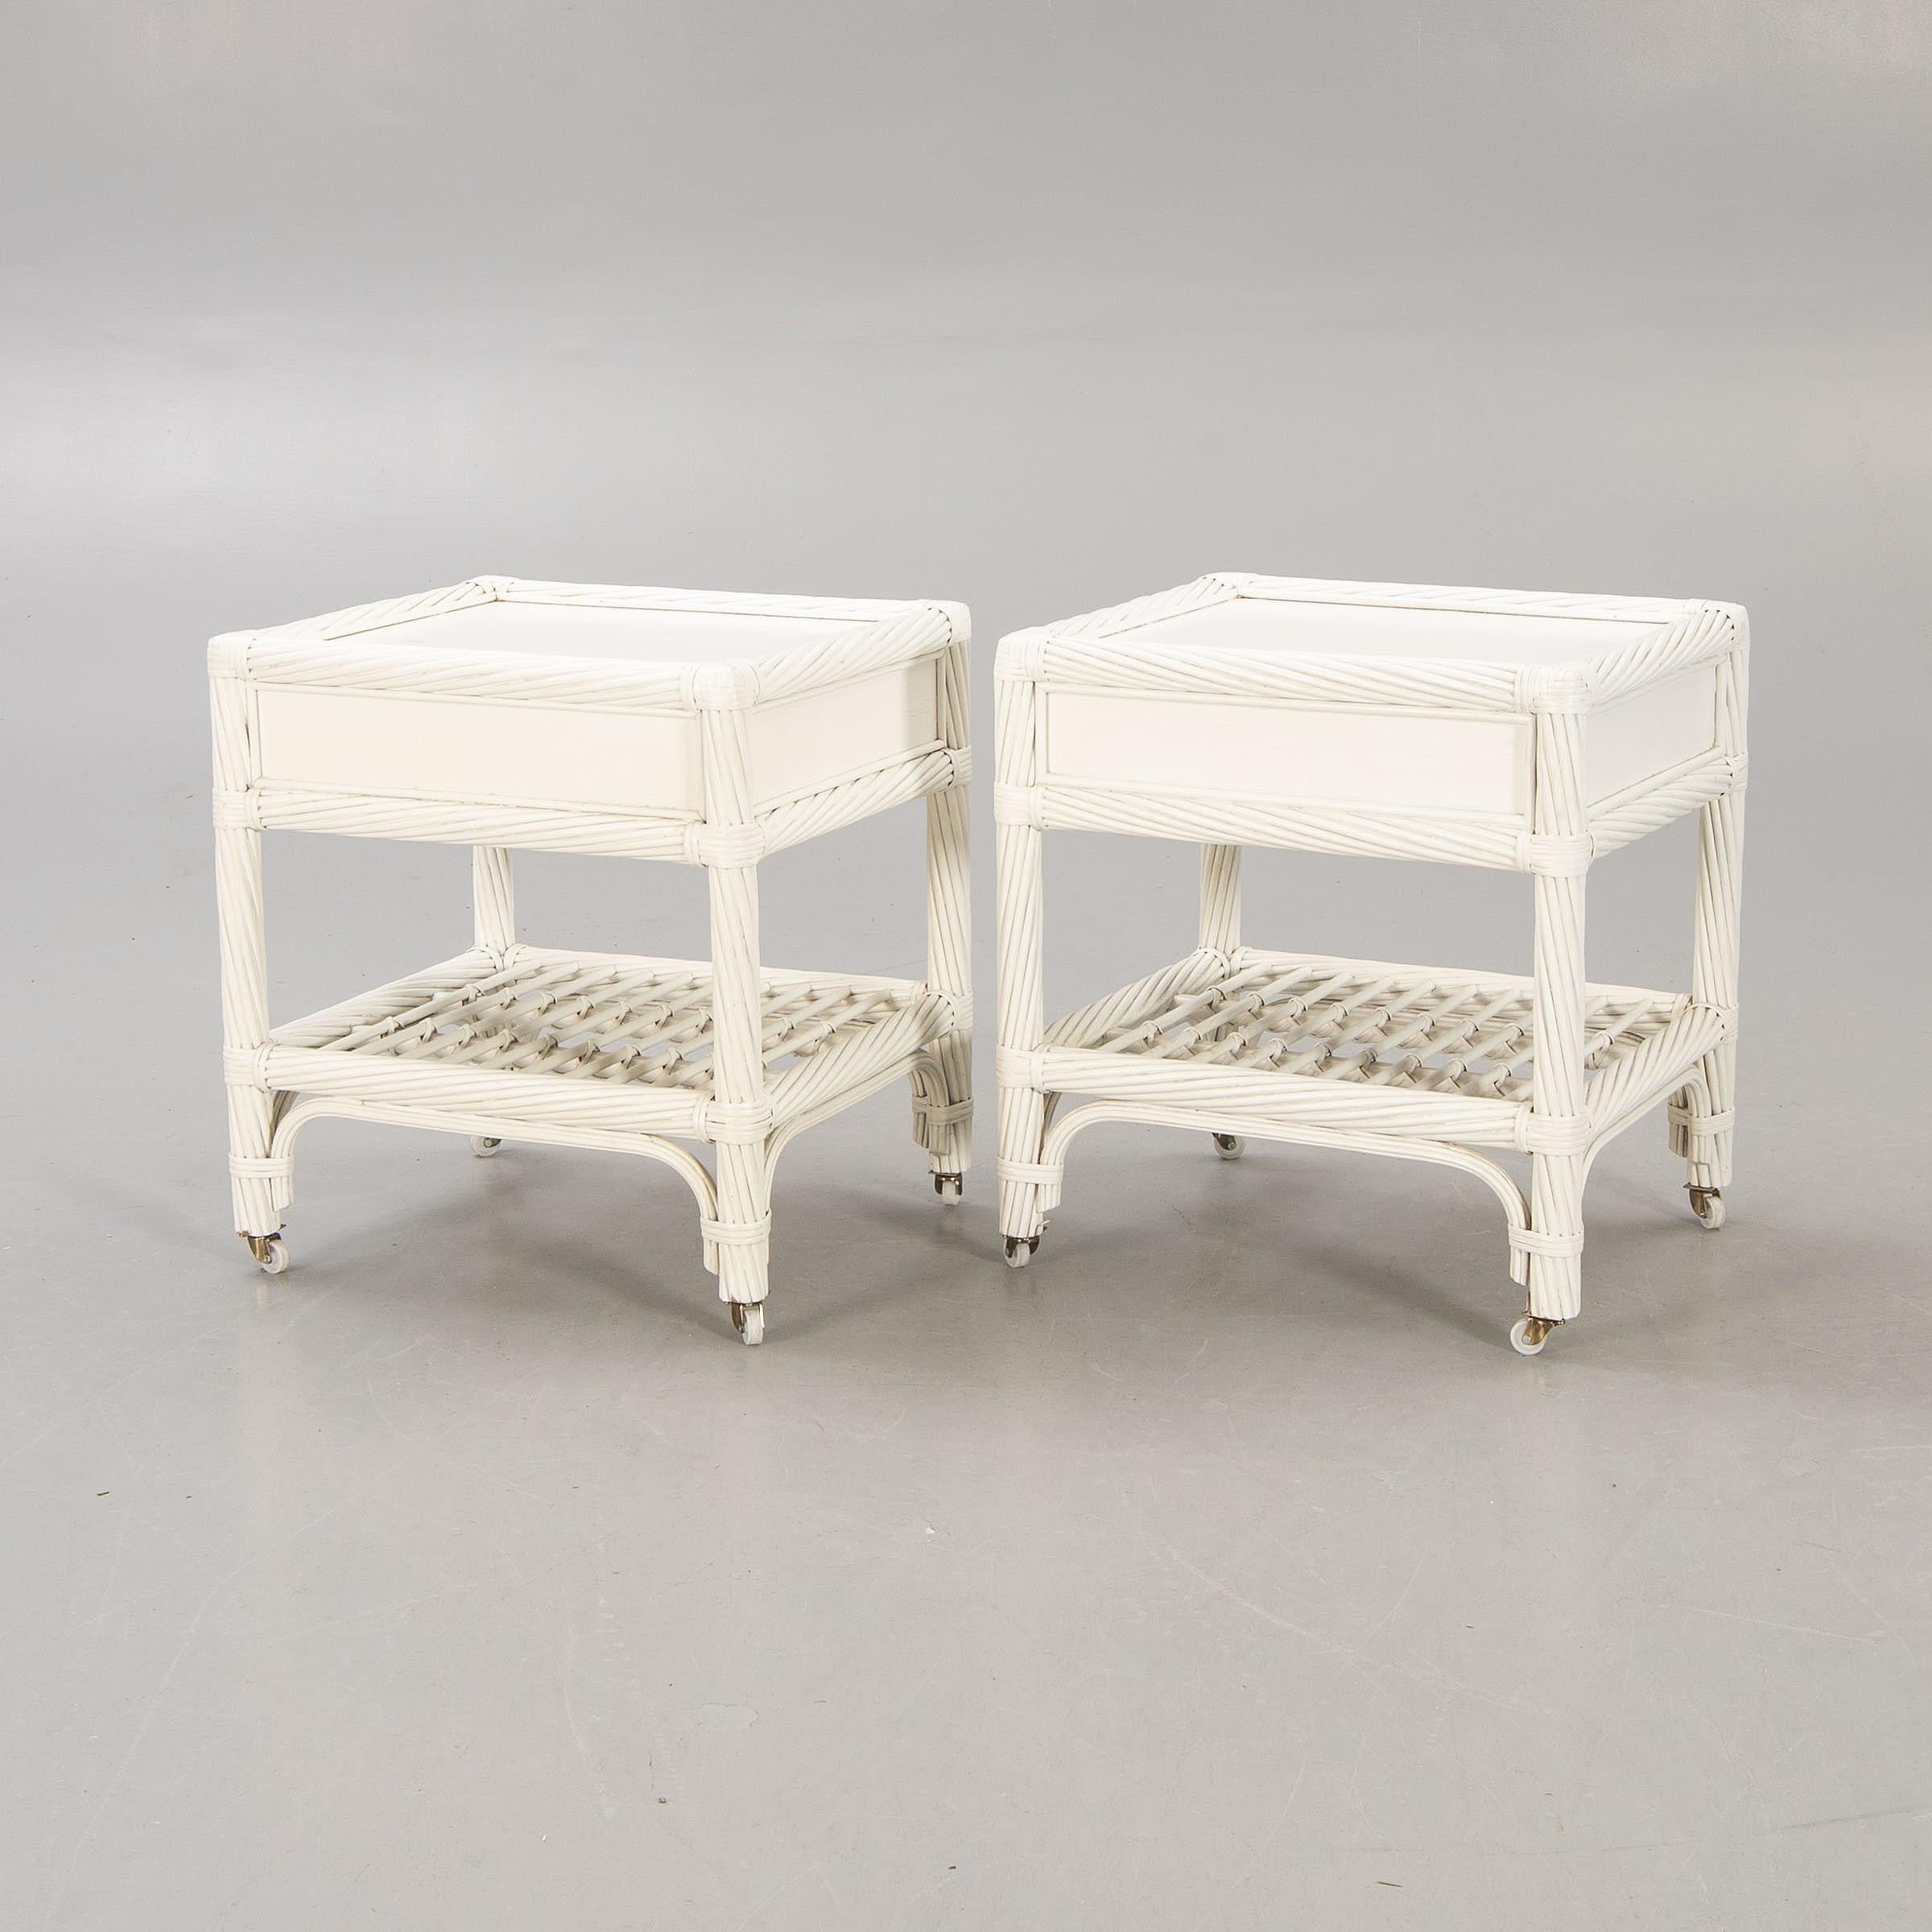 Pair of nightstand white lacquer bamboo and wood by DUX, Sweden, 1960.
Rare model in 